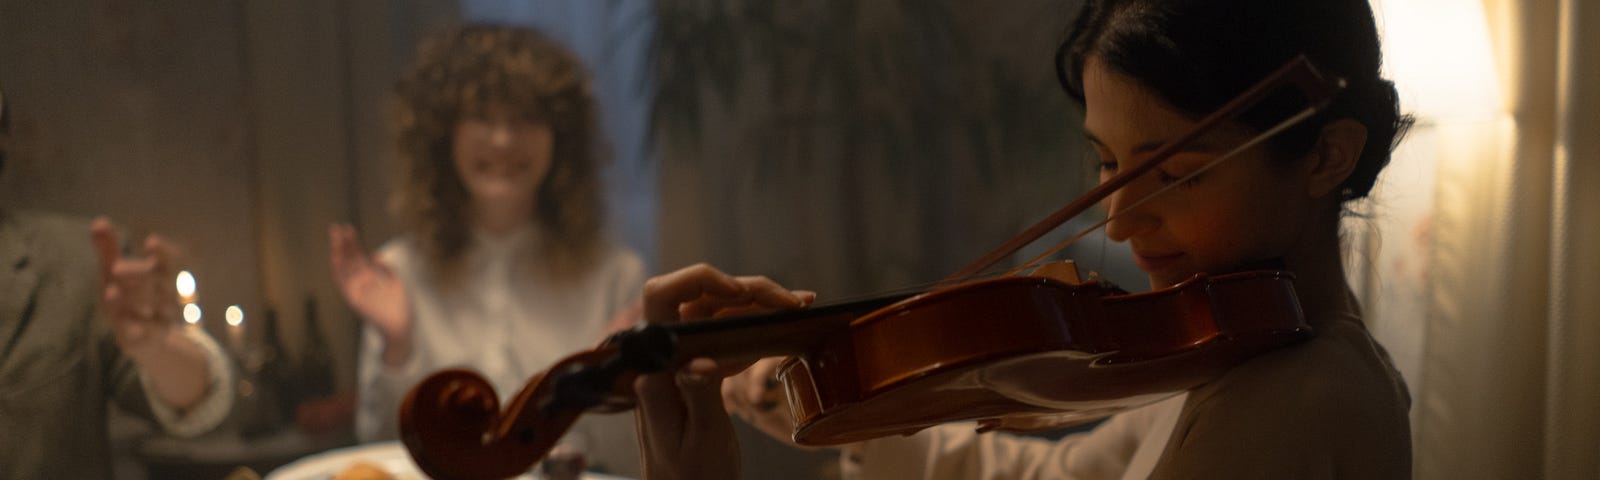 Woman playing a violin in a dimly lit room as background music for a dinner. There is another woman sitting at the dinner table in the background, looking like she is about to clap.